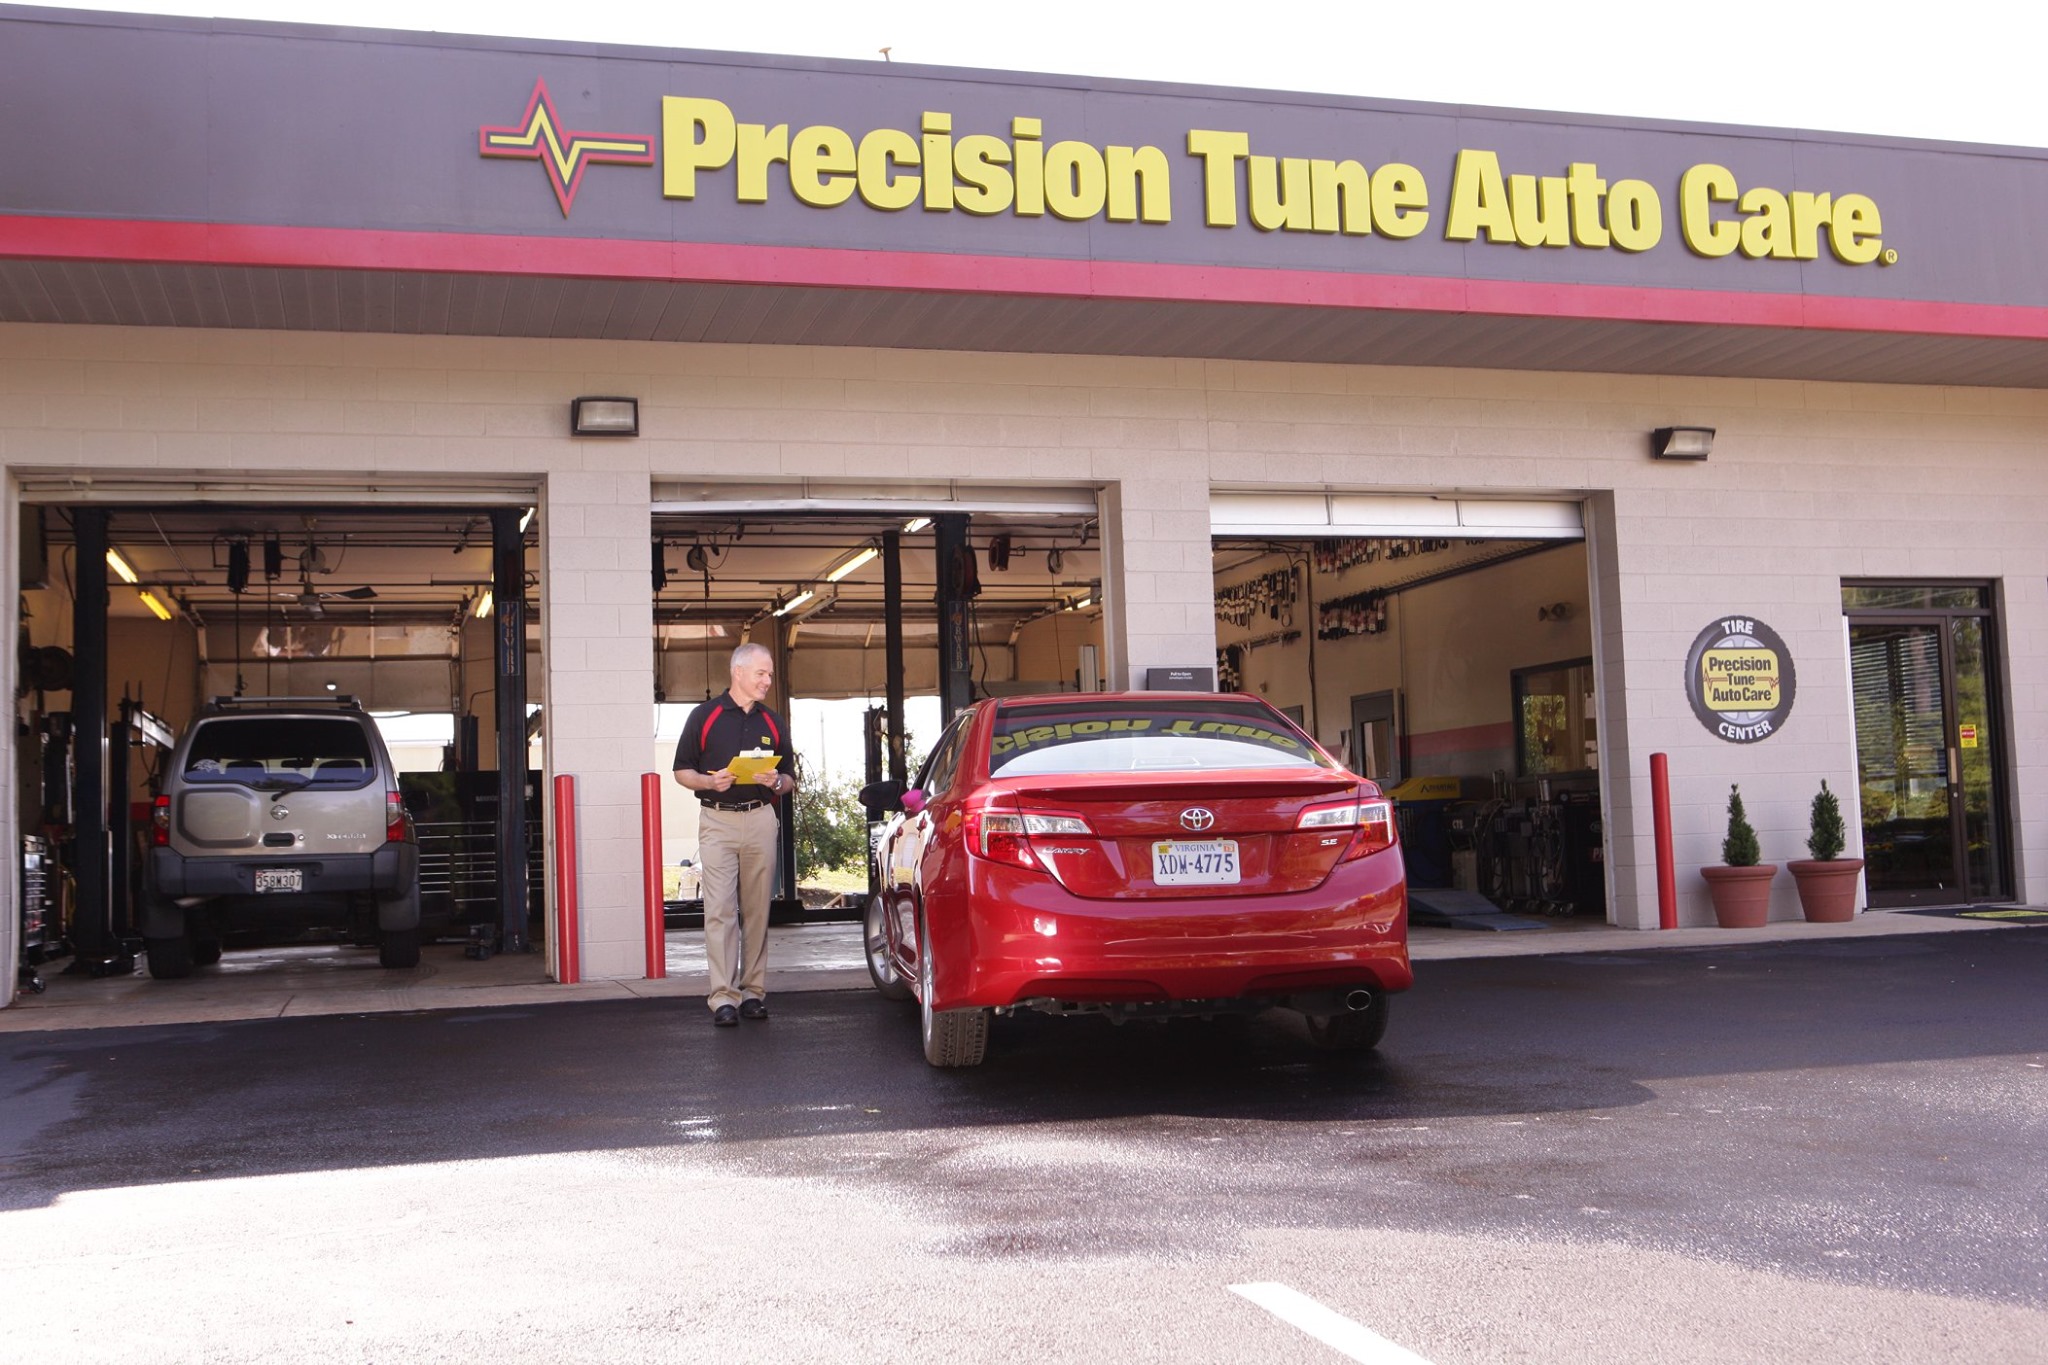 Who would you contact when you are ready to have your car serviced Precision Tune Auto Care has experienced professionals who offer the services you need to feel confident in your car care decisions.